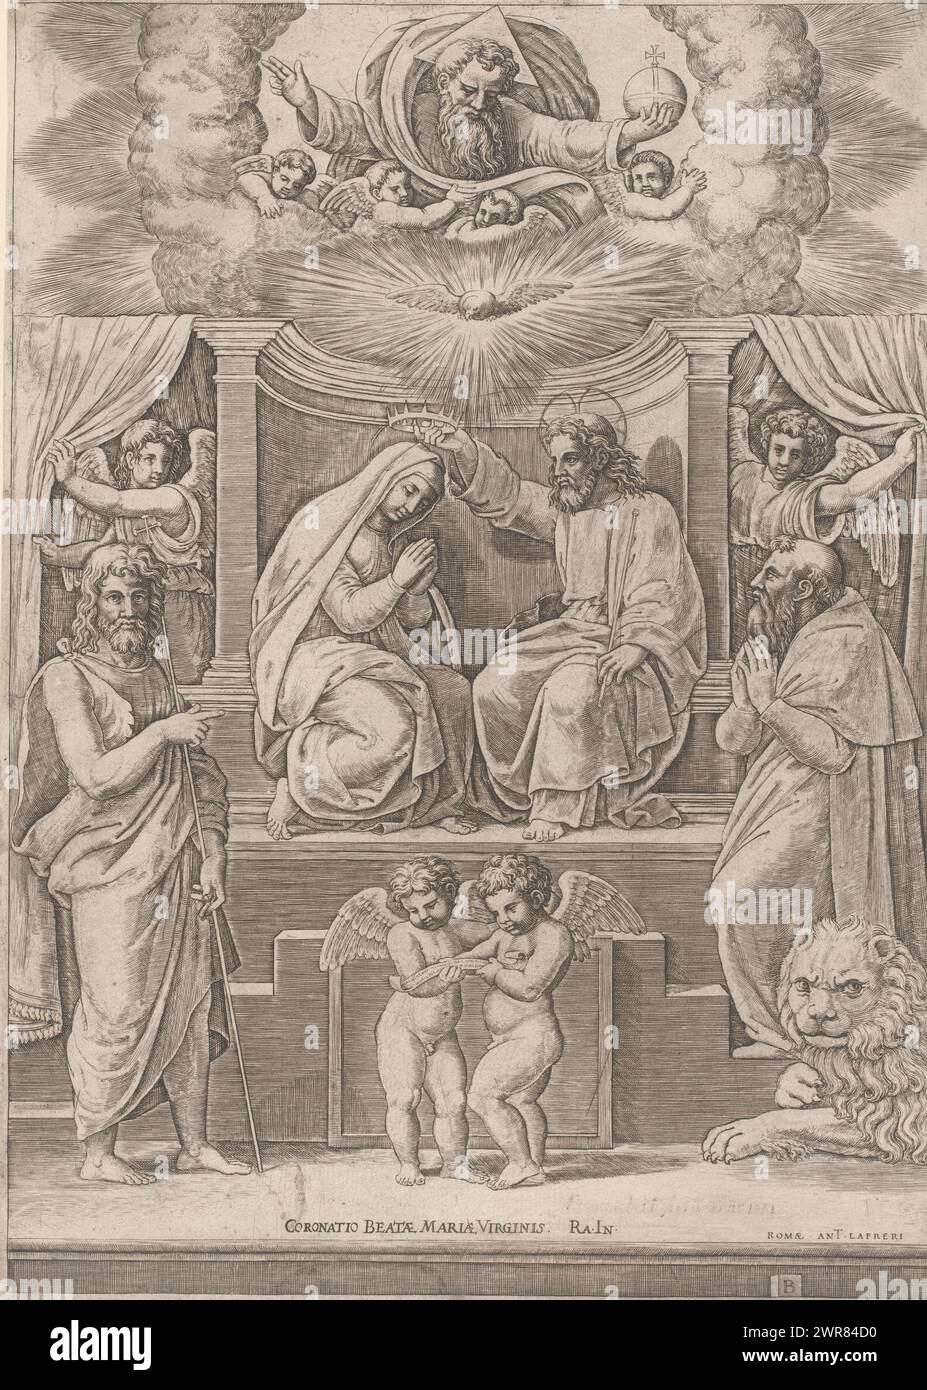 Mary crowned by Christ, Coronatio Beatae Mariae Virginis (title on object), In the middle Mary is crowned by Christ. In the foreground on the left is Saint John the Baptist and on the right is Saint Jerome with lion. In the sky God the Father and the Holy Spirit as a dove. Title bottom center., print maker: Meester van de Dobbelsteen, after design by: Rafaël, publisher: Antonio Lafreri, print maker: Italy, after design by: Italy, publisher: Rome, c. 1530 - c. 1560, paper, engraving, etching, height 359 mm × width 260 mm, print Stock Photo